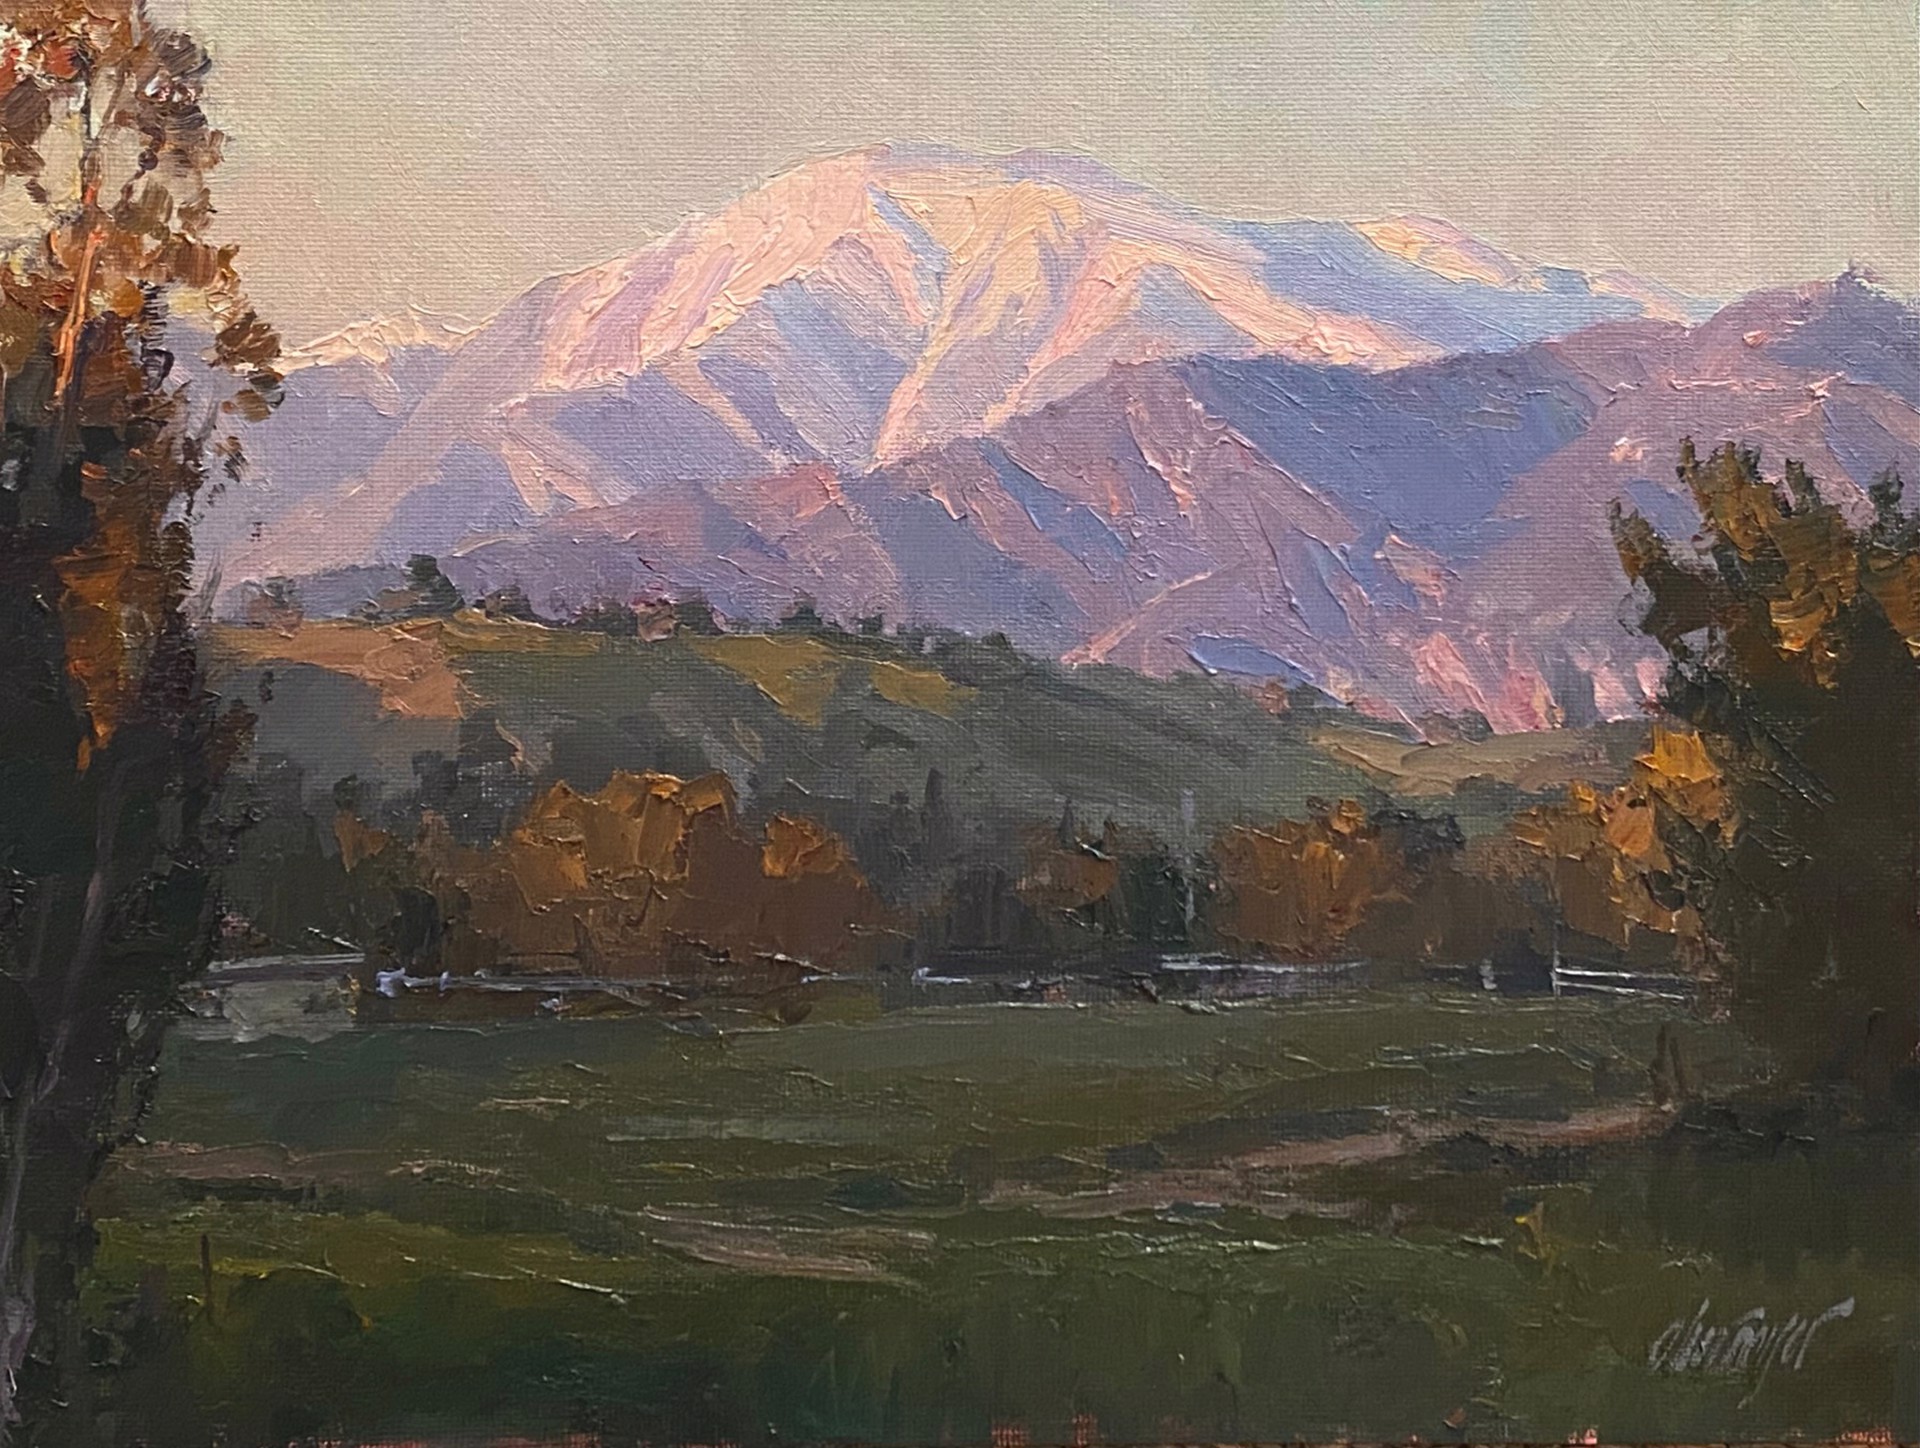 Mt. Baldy at Dusk by Michael Obermeyer